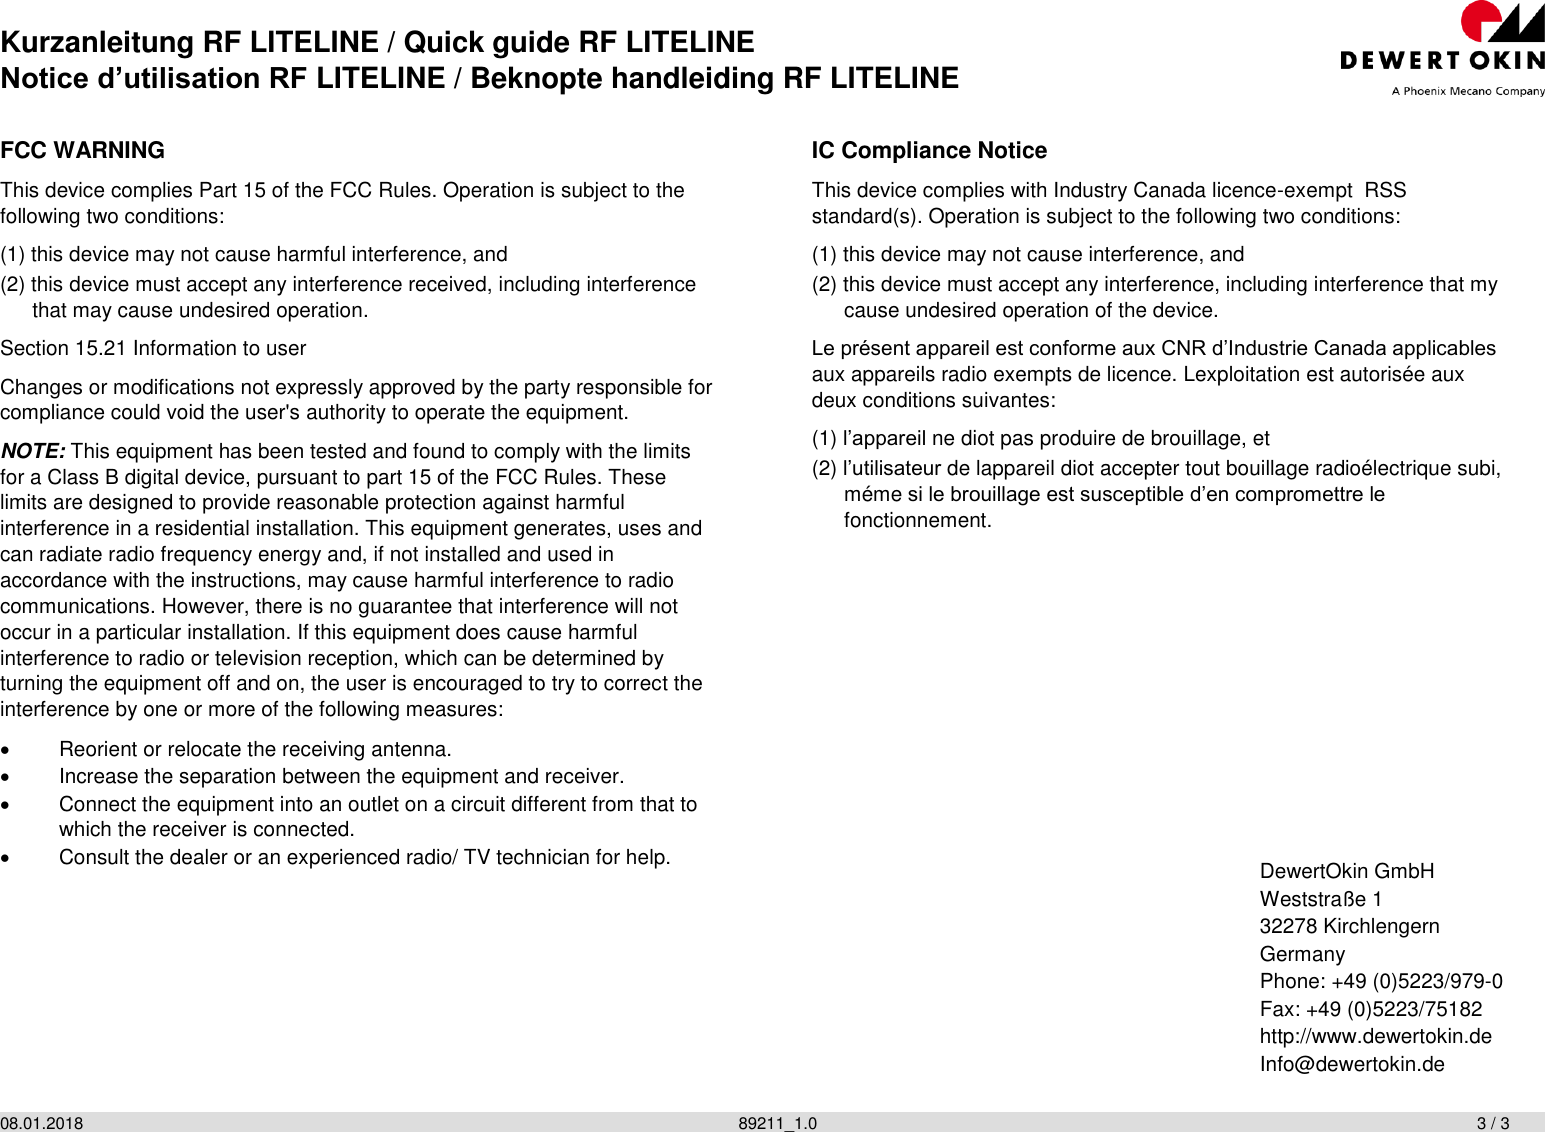 Kurzanleitung RF LITELINE / Quick guide RF LITELINE Notice d’utilisation RF LITELINE / Beknopte handleiding RF LITELINE 08.01.2018                  89211_1.0                  3 / 3   FCC WARNING This device complies Part 15 of the FCC Rules. Operation is subject to the following two conditions: (1) this device may not cause harmful interference, and (2) this device must accept any interference received, including interference that may cause undesired operation. Section 15.21 Information to user Changes or modifications not expressly approved by the party responsible for compliance could void the user&apos;s authority to operate the equipment. NOTE: This equipment has been tested and found to comply with the limits for a Class B digital device, pursuant to part 15 of the FCC Rules. These limits are designed to provide reasonable protection against harmful interference in a residential installation. This equipment generates, uses and can radiate radio frequency energy and, if not installed and used in accordance with the instructions, may cause harmful interference to radio communications. However, there is no guarantee that interference will not occur in a particular installation. If this equipment does cause harmful interference to radio or television reception, which can be determined by turning the equipment off and on, the user is encouraged to try to correct the interference by one or more of the following measures:   Reorient or relocate the receiving antenna.   Increase the separation between the equipment and receiver.   Connect the equipment into an outlet on a circuit different from that to which the receiver is connected.   Consult the dealer or an experienced radio/ TV technician for help.  IC Compliance Notice This device complies with Industry Canada licence-exempt  RSS standard(s). Operation is subject to the following two conditions: (1) this device may not cause interference, and (2) this device must accept any interference, including interference that my cause undesired operation of the device. Le présent appareil est conforme aux CNR d’Industrie Canada applicables aux appareils radio exempts de licence. Lexploitation est autorisée aux deux conditions suivantes: (1) l’appareil ne diot pas produire de brouillage, et (2) l’utilisateur de lappareil diot accepter tout bouillage radioélectrique subi, méme si le brouillage est susceptible d’en compromettre le fonctionnement. DewertOkin GmbH Weststraße 1 32278 Kirchlengern Germany Phone: +49 (0)5223/979-0 Fax: +49 (0)5223/75182 http://www.dewertokin.de  Info@dewertokin.de  